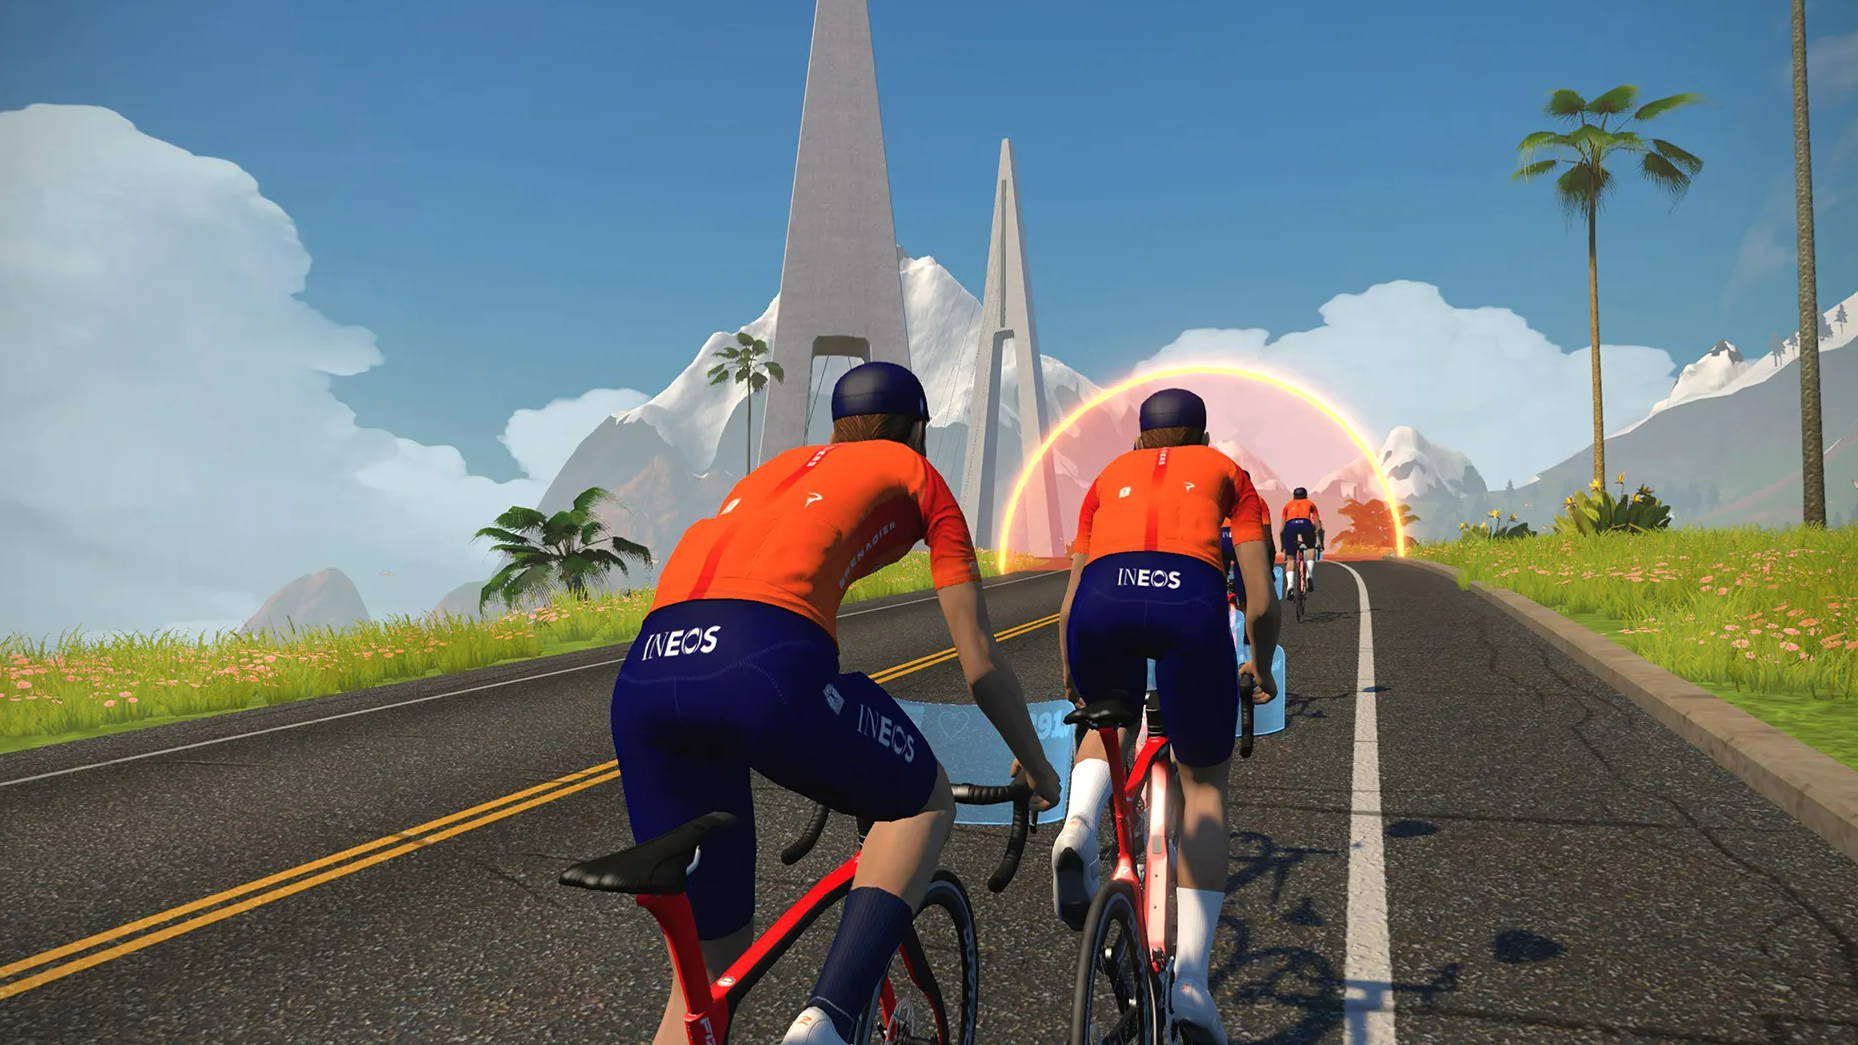 Its Time to Zwift New features make this Zwift season the best yet!